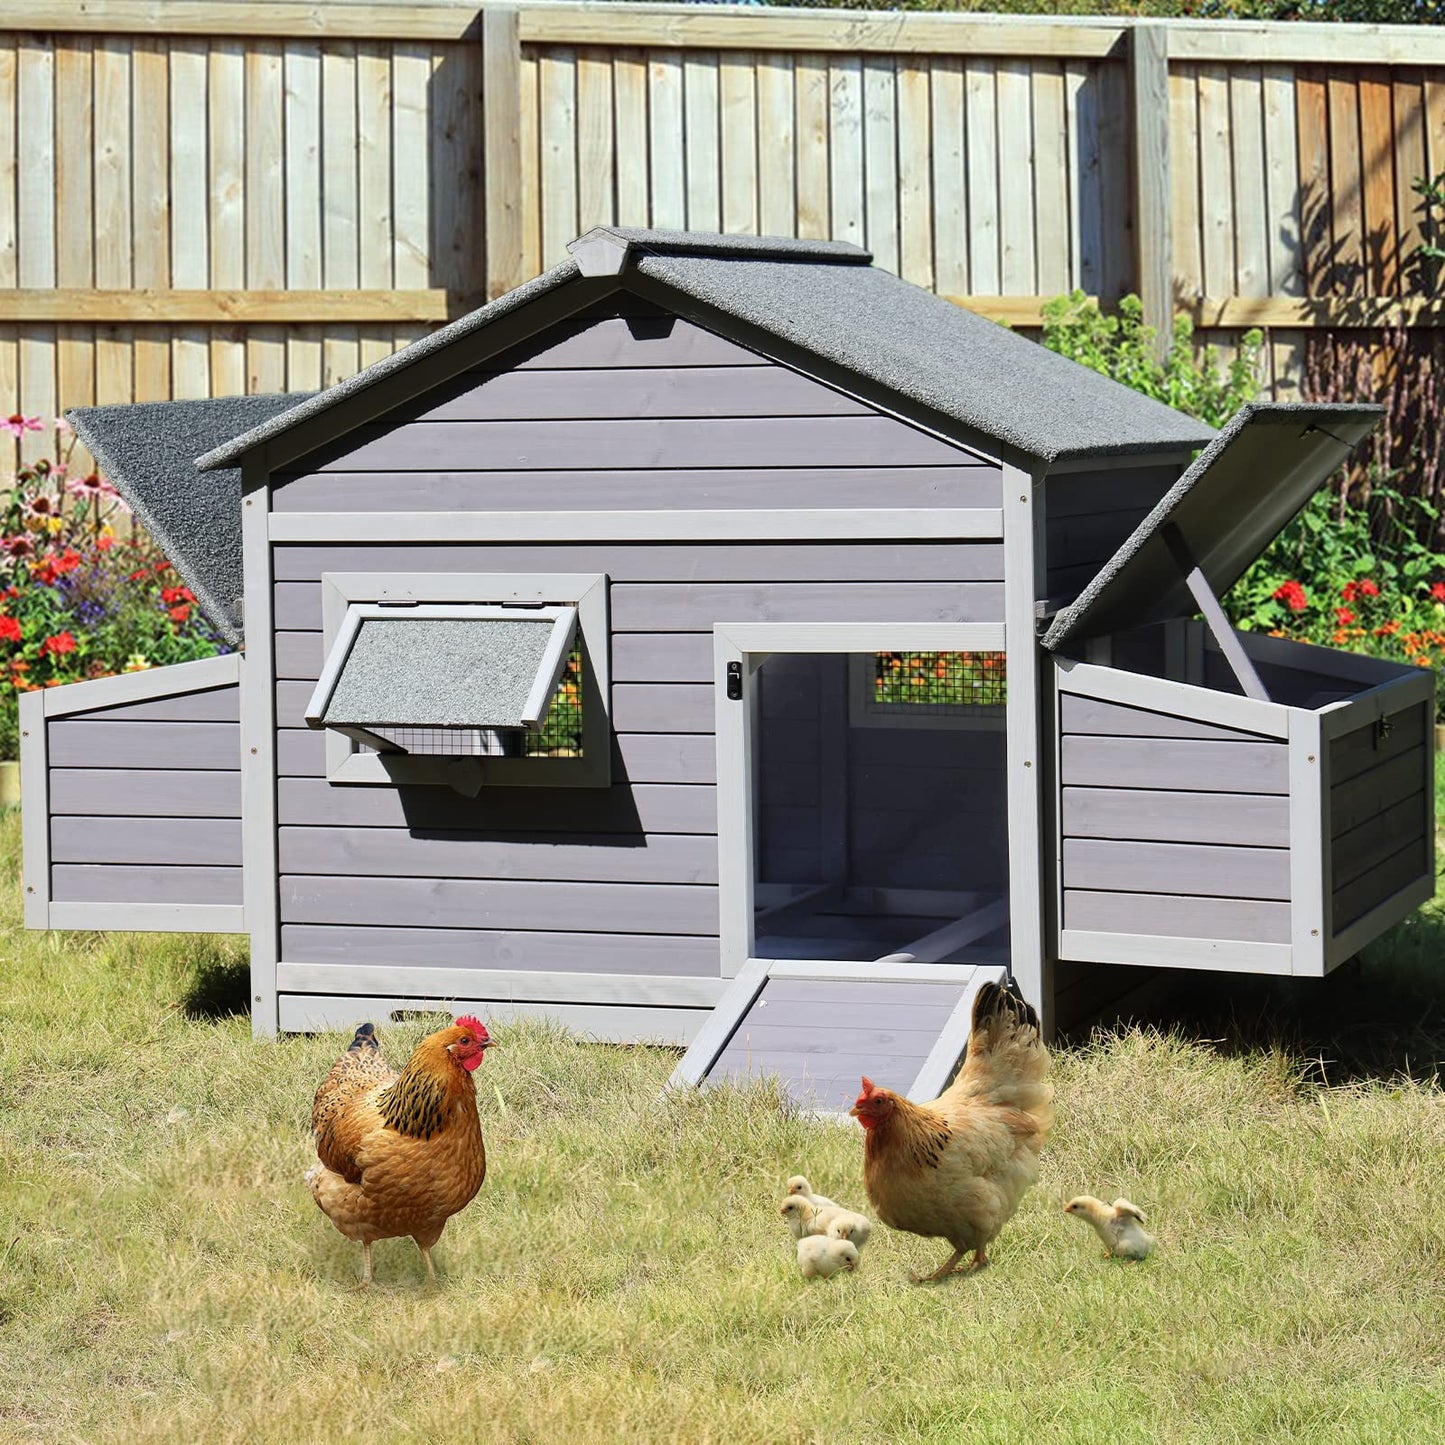 Aivituvin Chicken Coop with Two Large Nesting Boxes Wooden Hen House Outdoor Poultry Cage Duck Coop Weatherproof